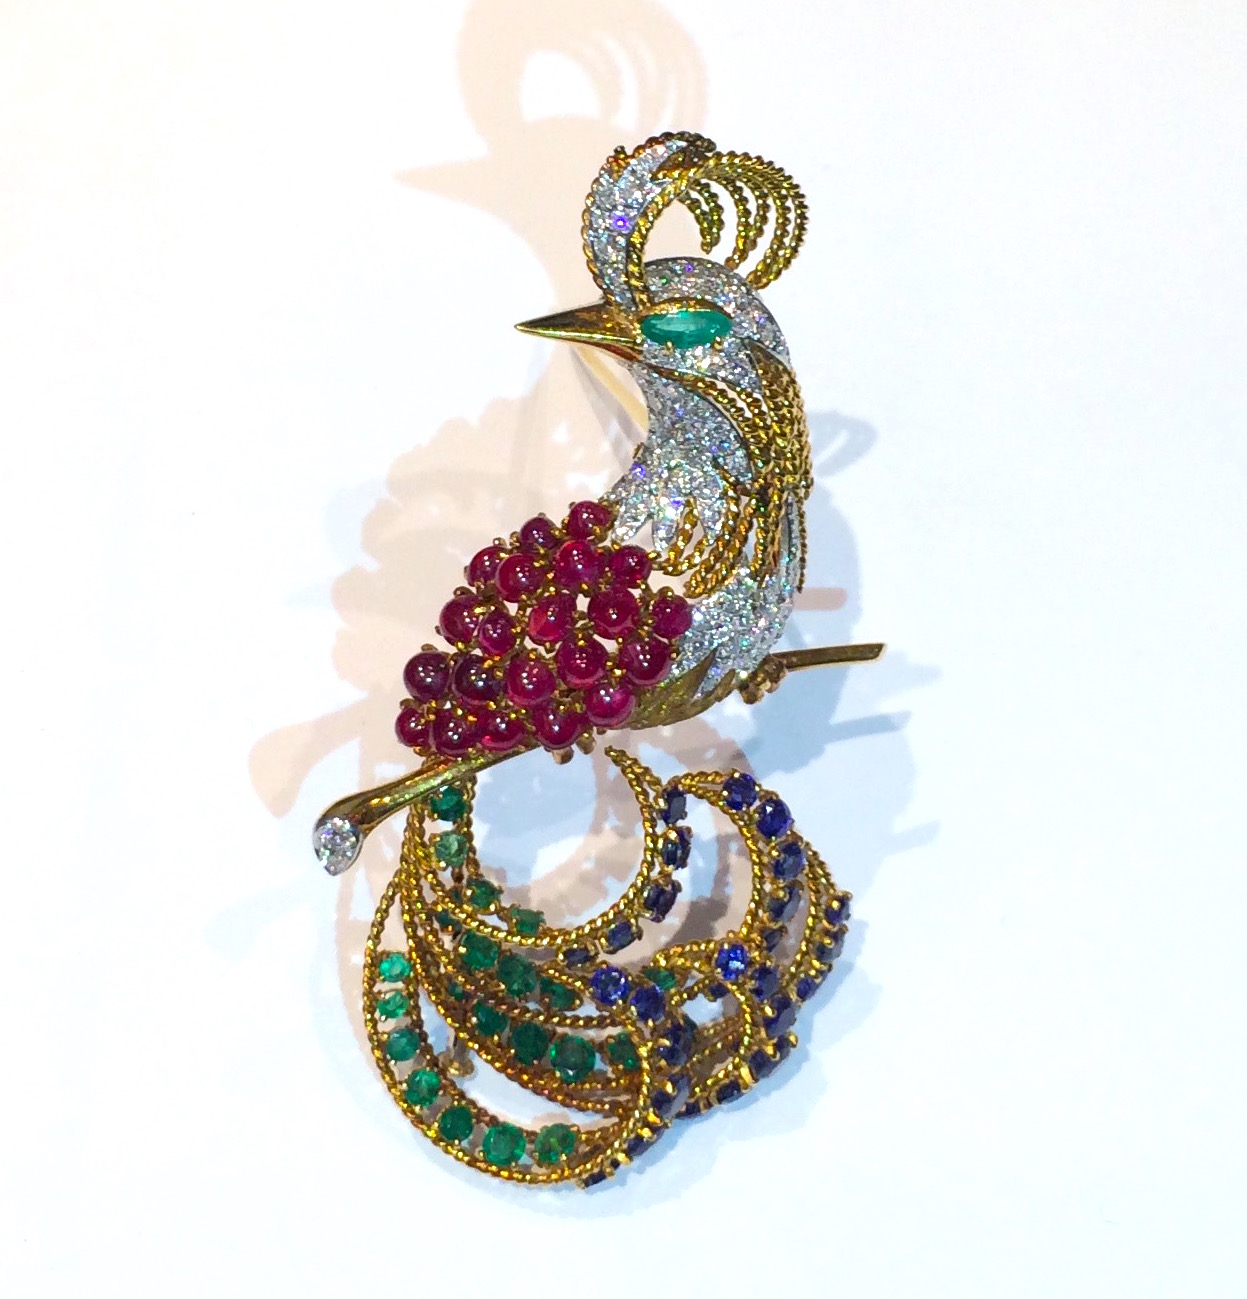 Retro “Bird of Paradise” brooch, 18K yellow gold set with cabochon rubies, emeralds, sapphires and pave diamonds, c. 1940’s